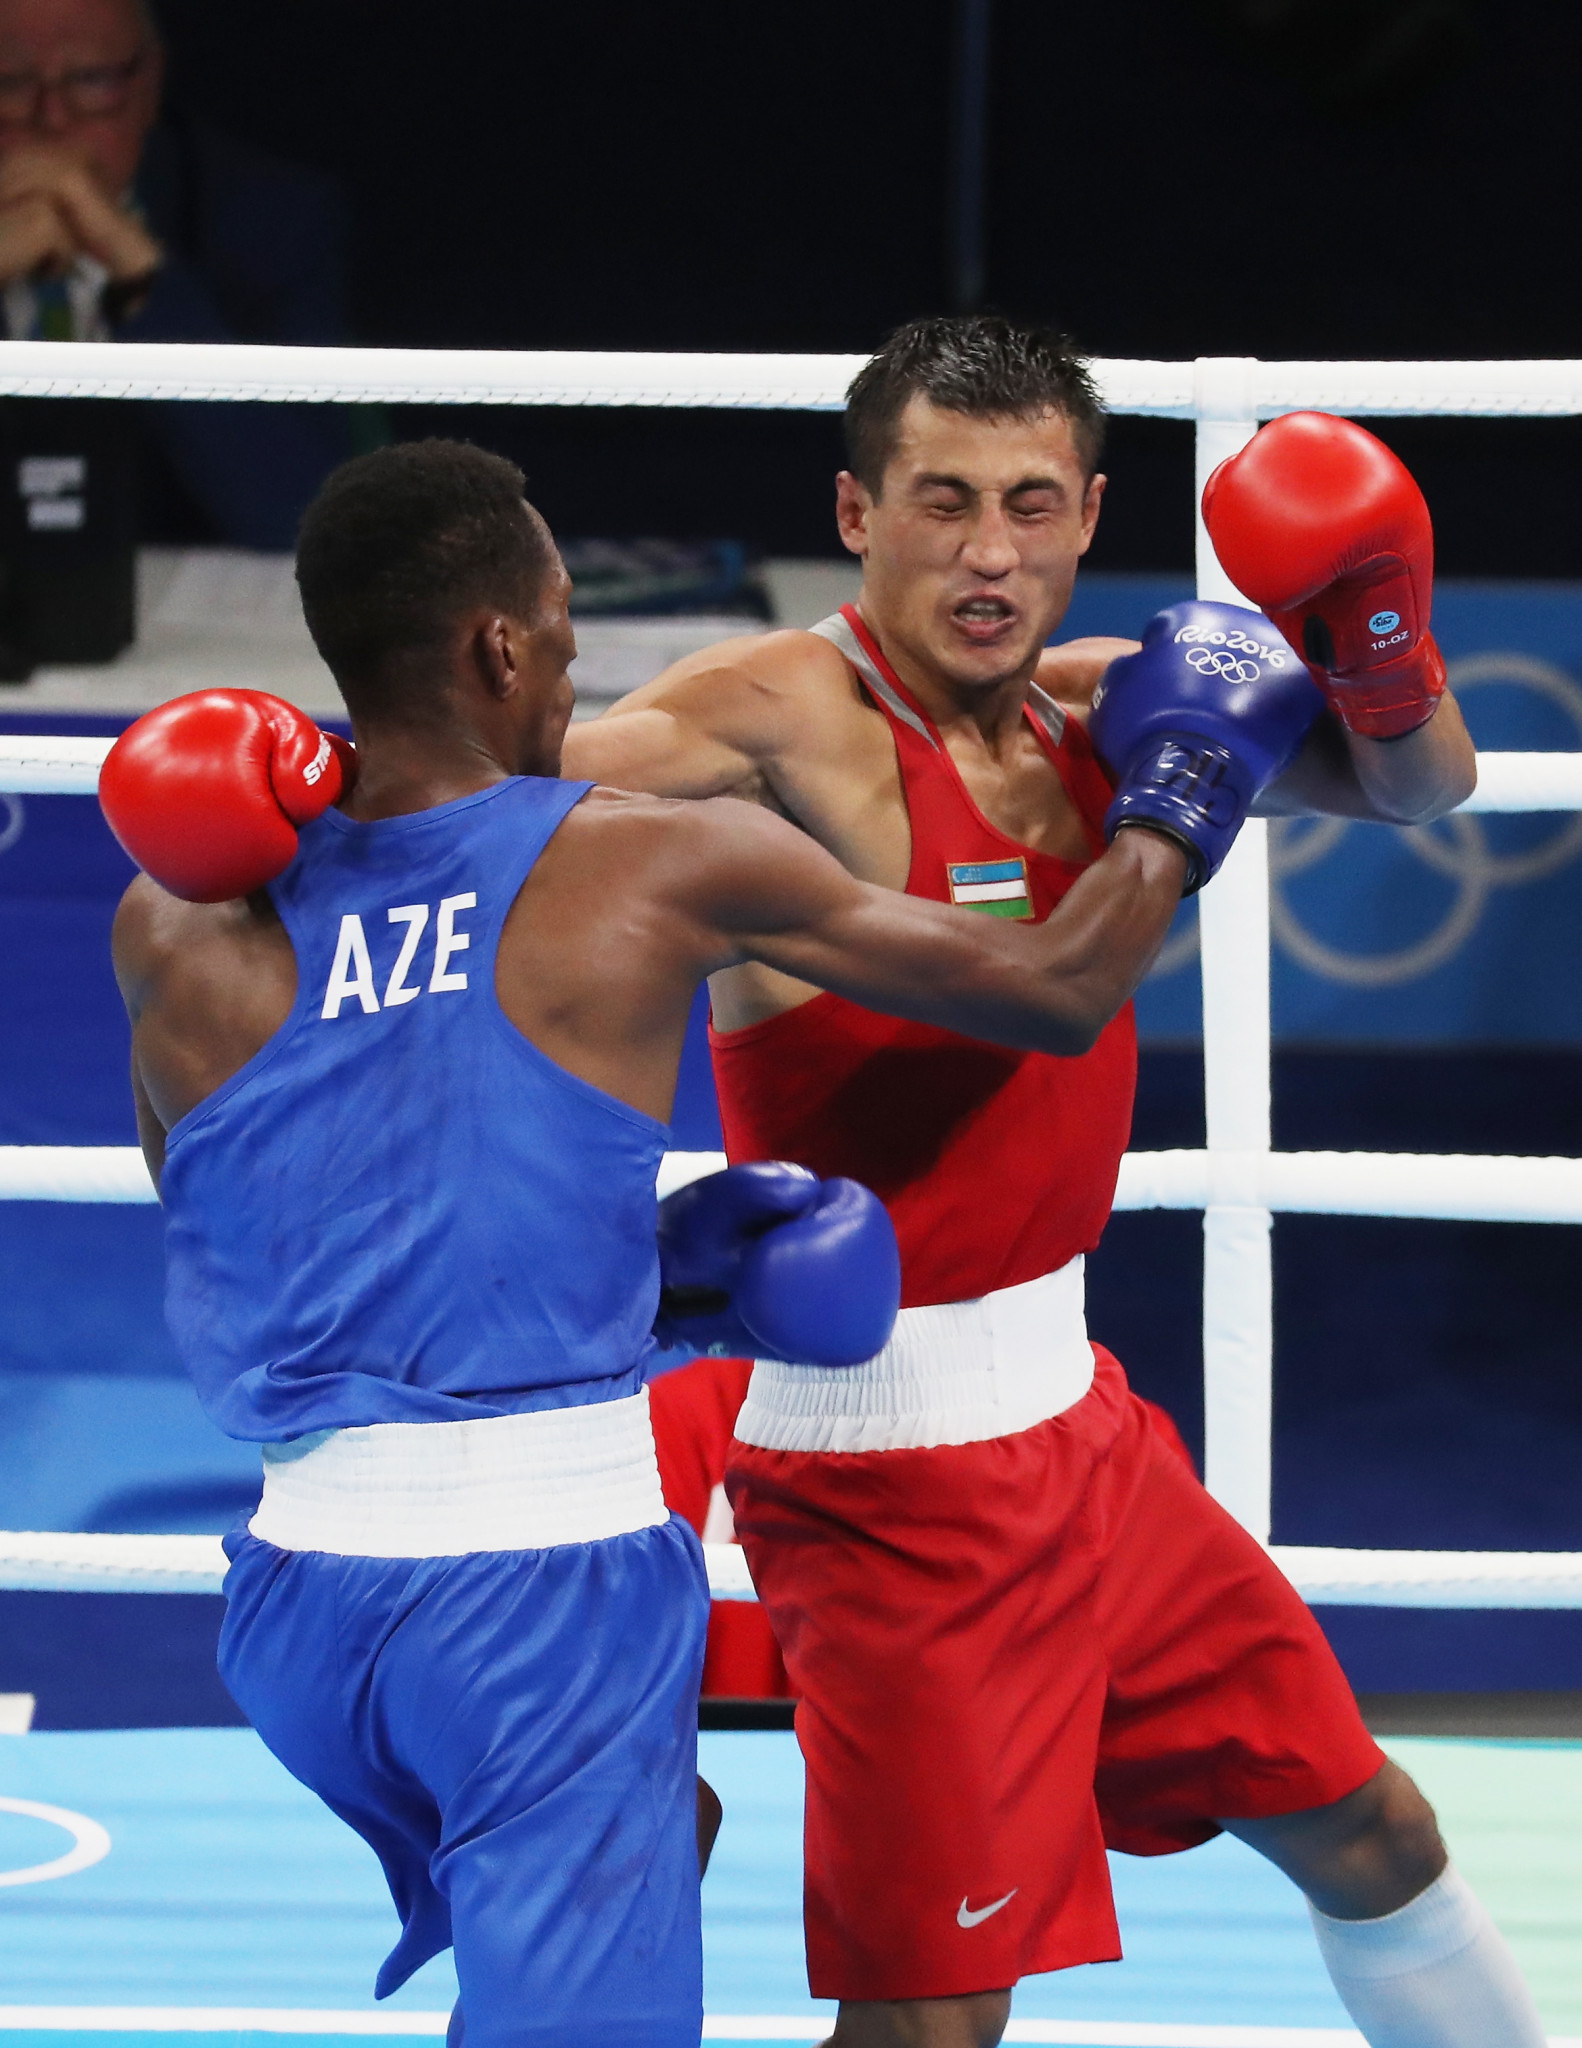 Much uncertainty surrounds the future of boxing at the Olympic Games ©Getty Images